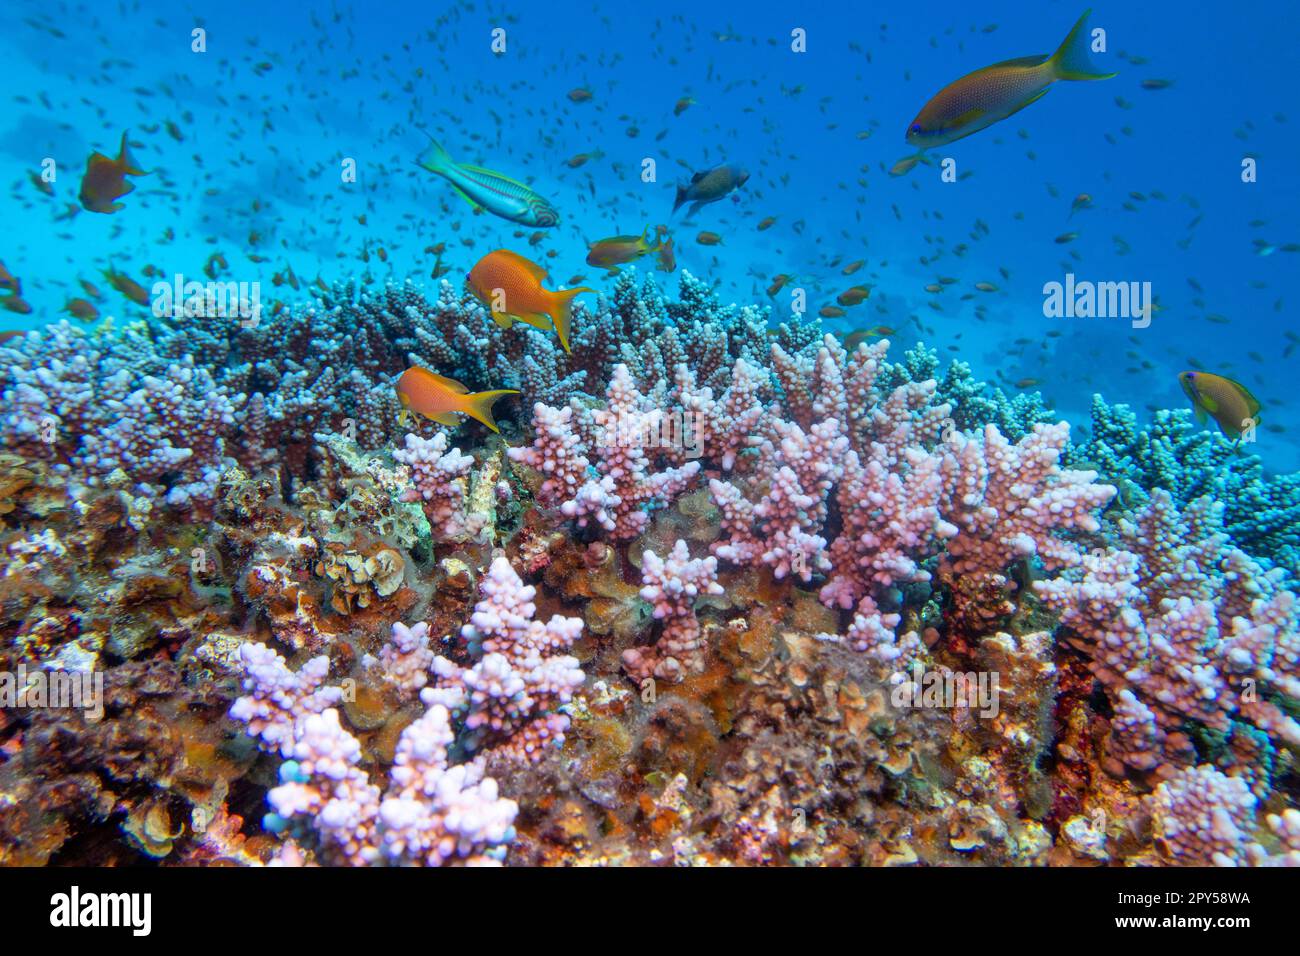 Colorful, picturesque coral reef at the bottom of tropical sea, hard corals pink acropora and fishes Anthias, underwater landscape Stock Photo